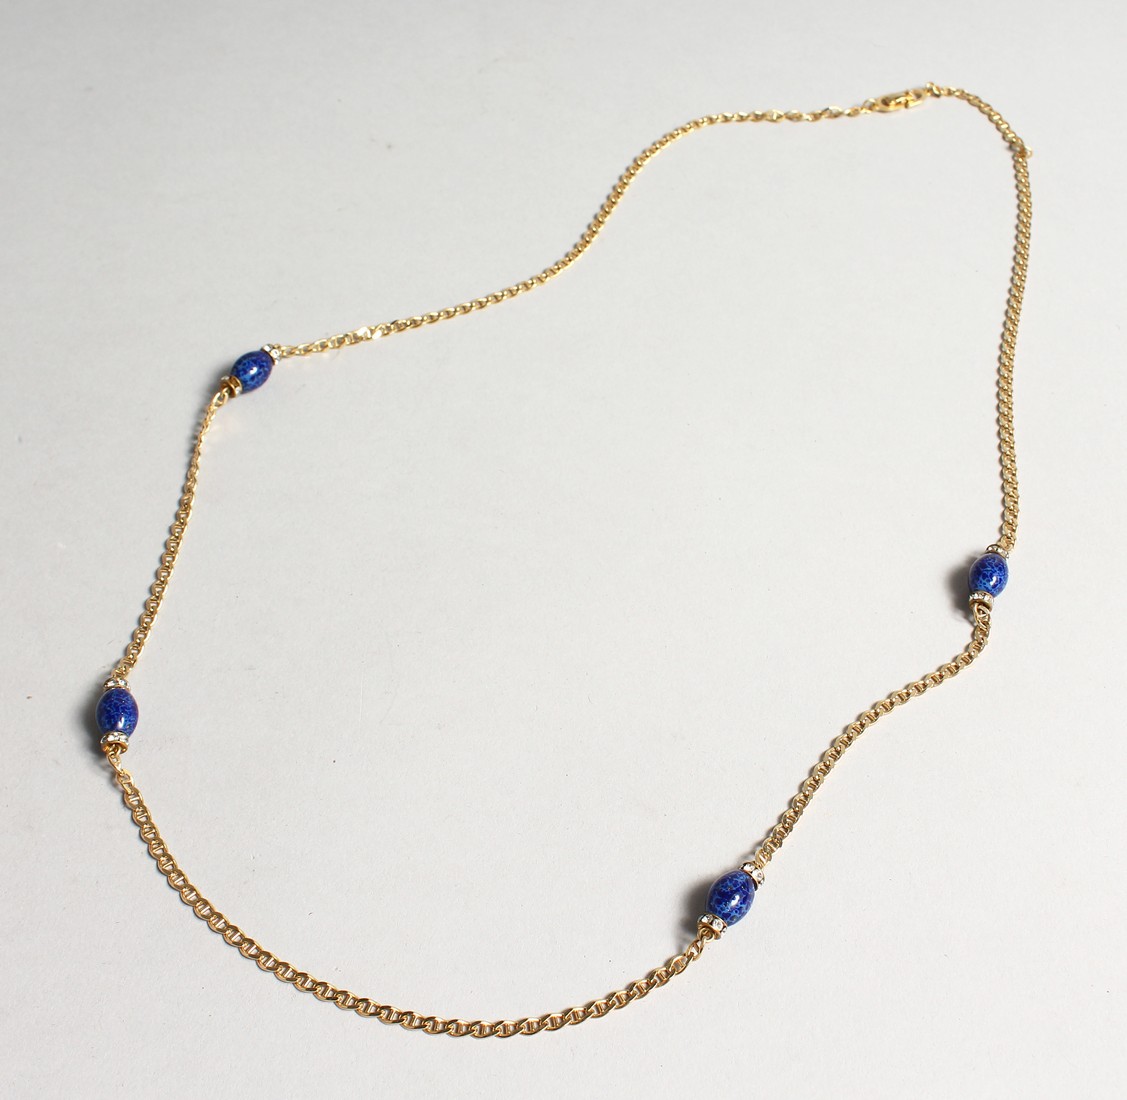 A CHRISTIAN DIOR 1980'S GILT AND LAPIS NECKLACE in a Christian Dior box.